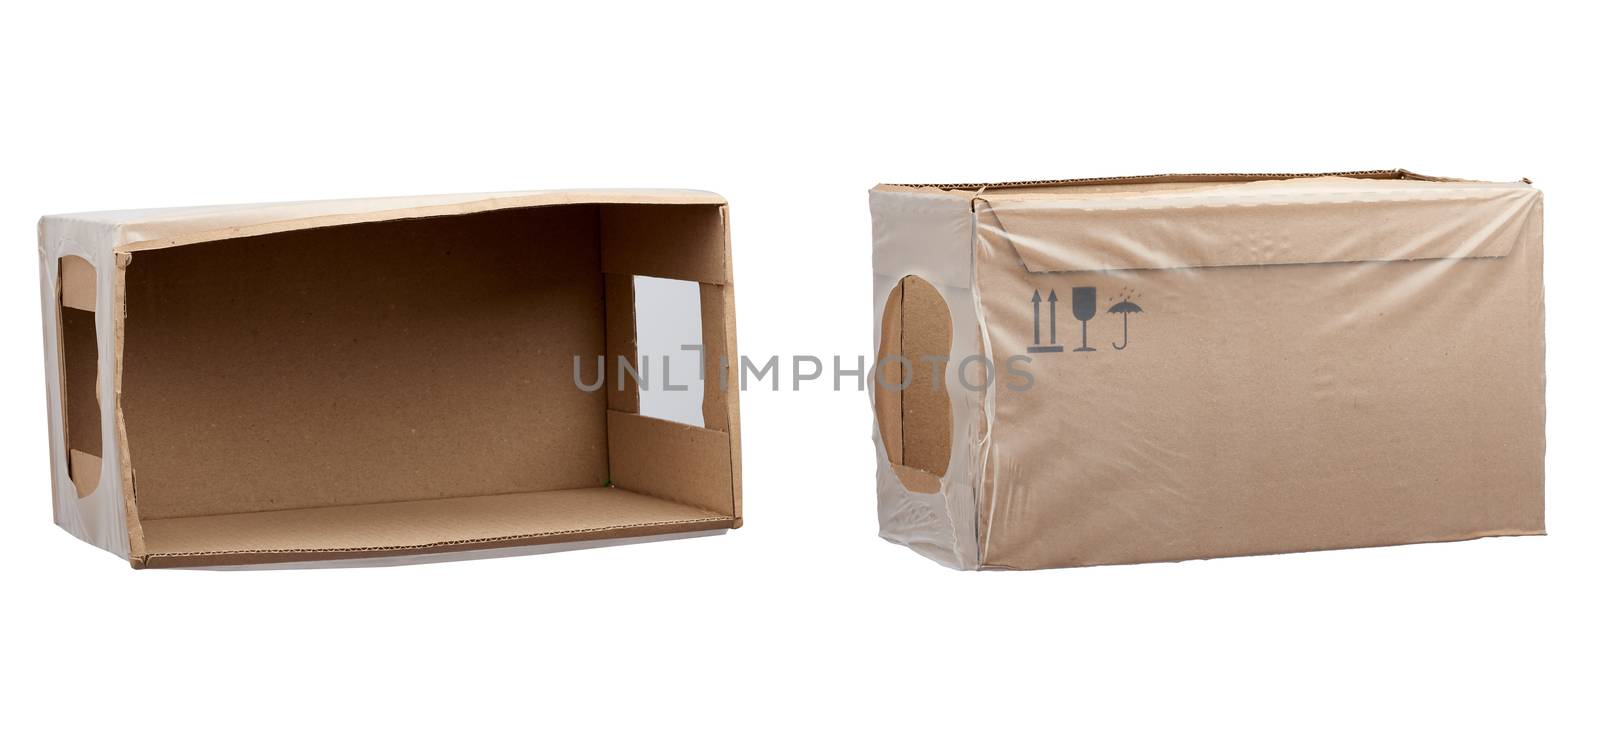 empty rectangular box wrapped in transparent polyethylene, box for transporting bottles, side view